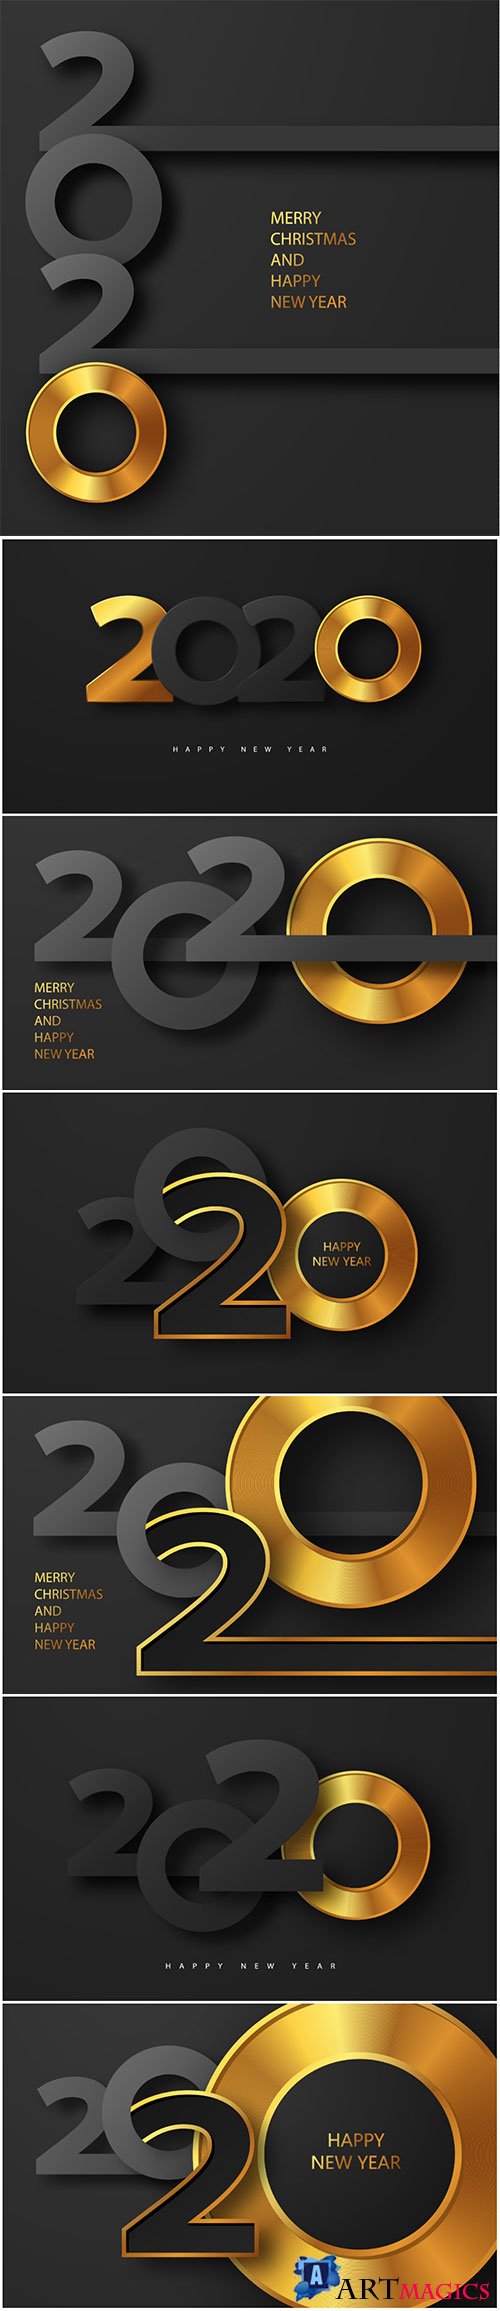 Merry Christmas and Happy new year 2020 banner with golden luxury text